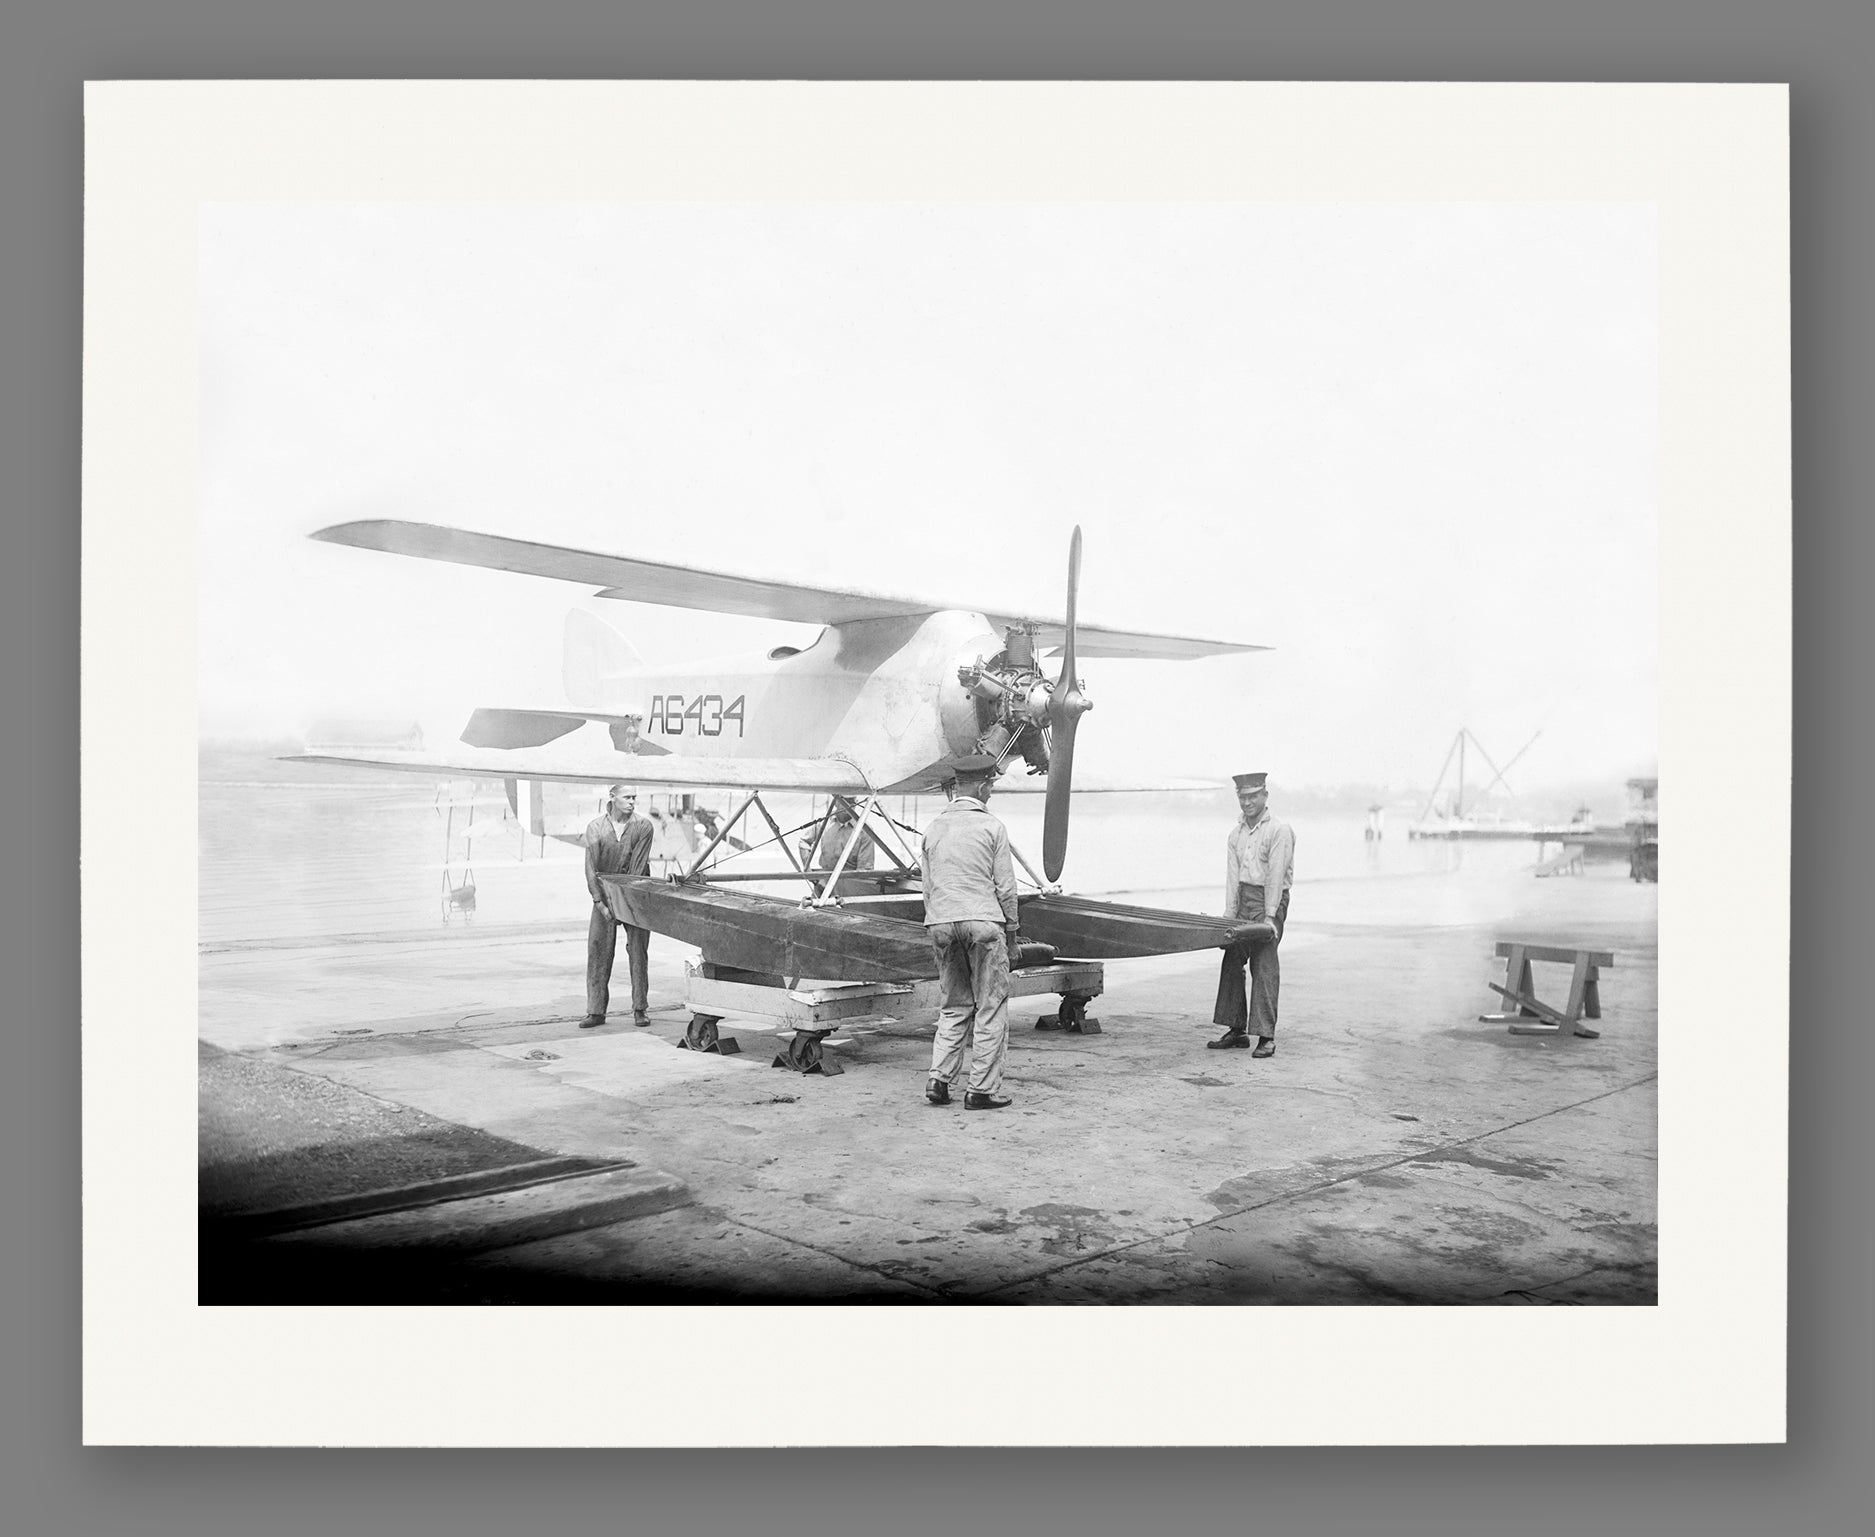 An archival paper print of a vintage photograph of a submarine plane